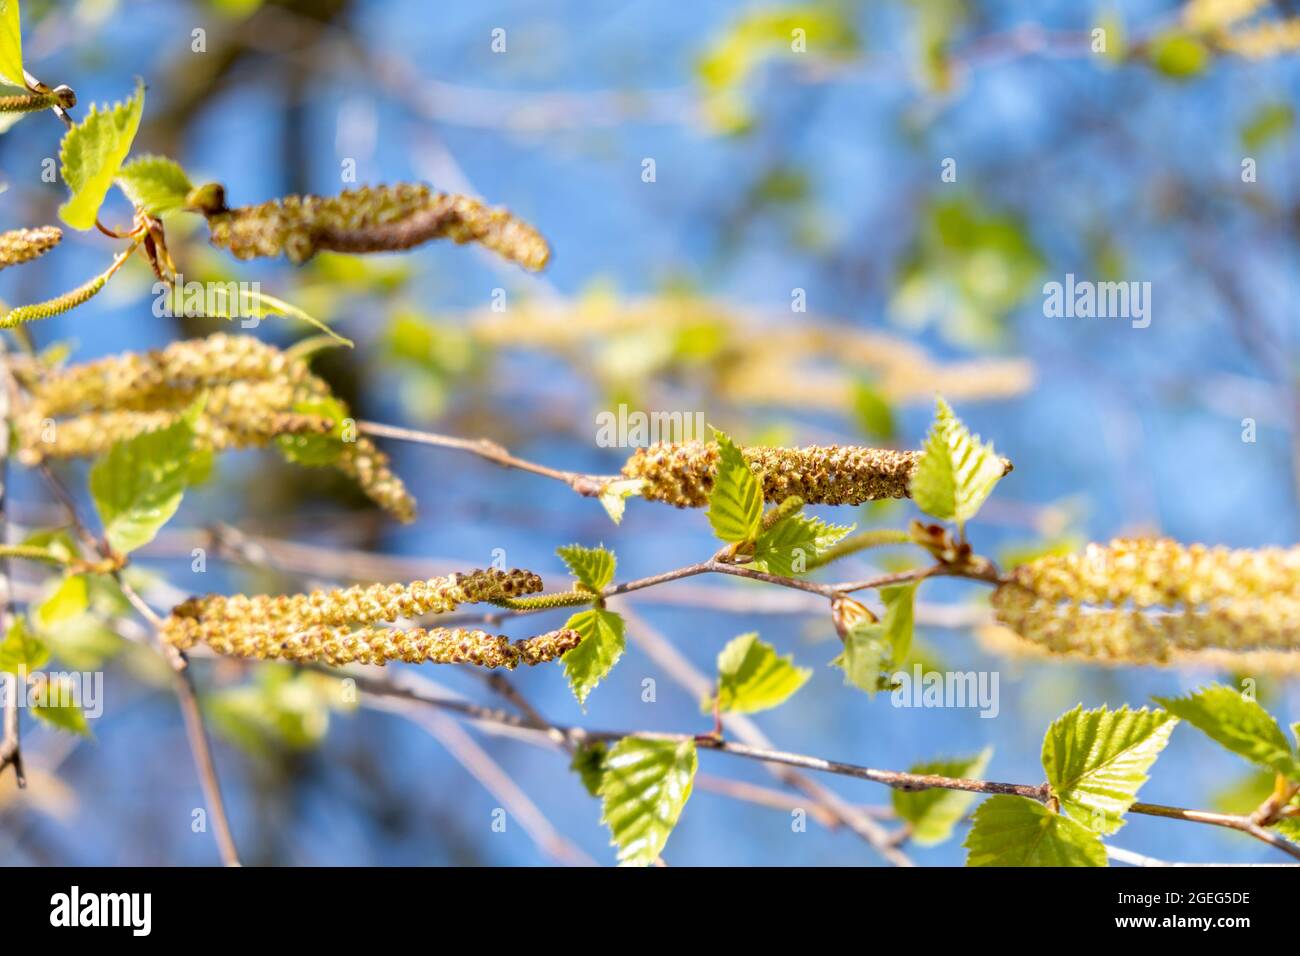 Birch catkins, betula, in spring. Male catkins on a branch, pollen dispersal causing risks of allergy Stock Photo